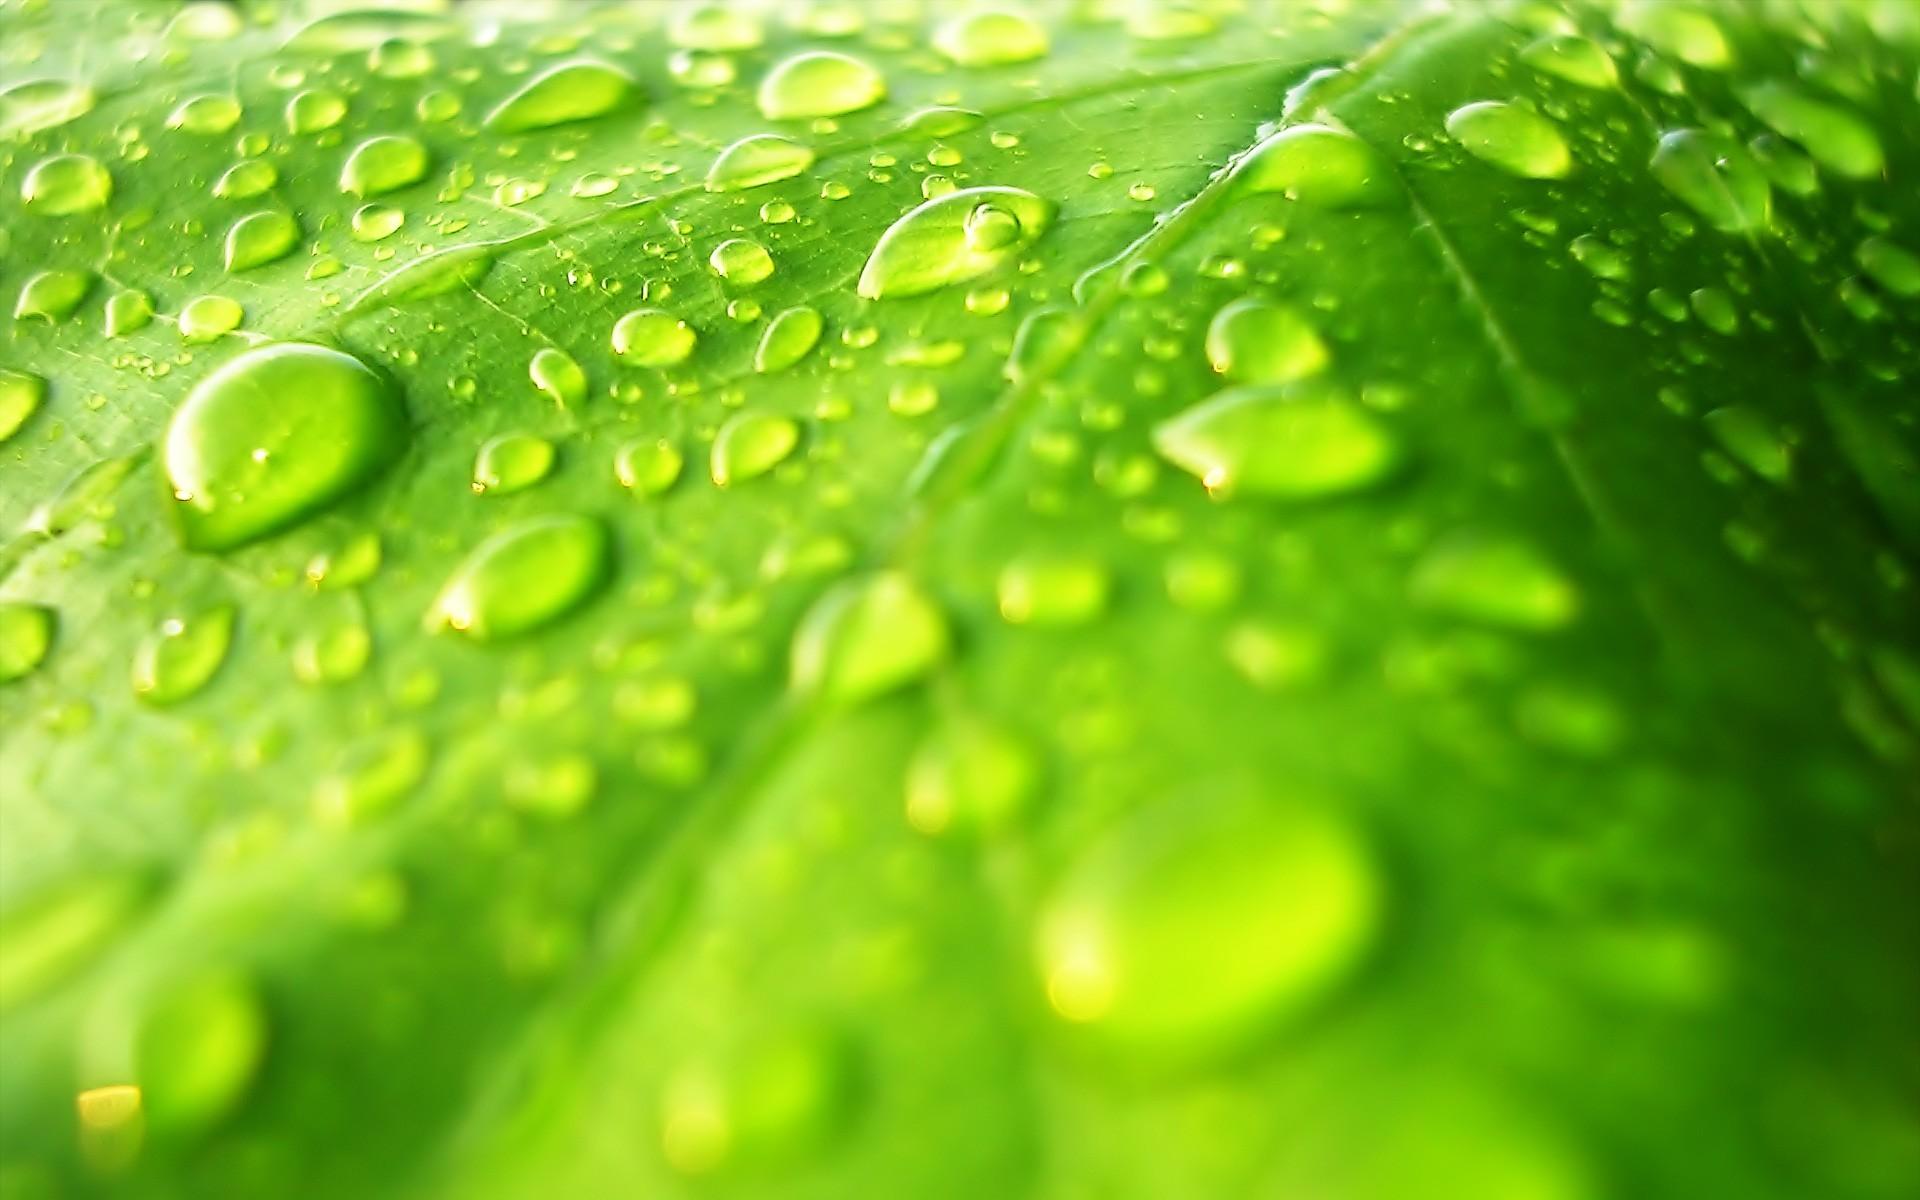 Download 1920x1200 Water drops on leaf wallpaper